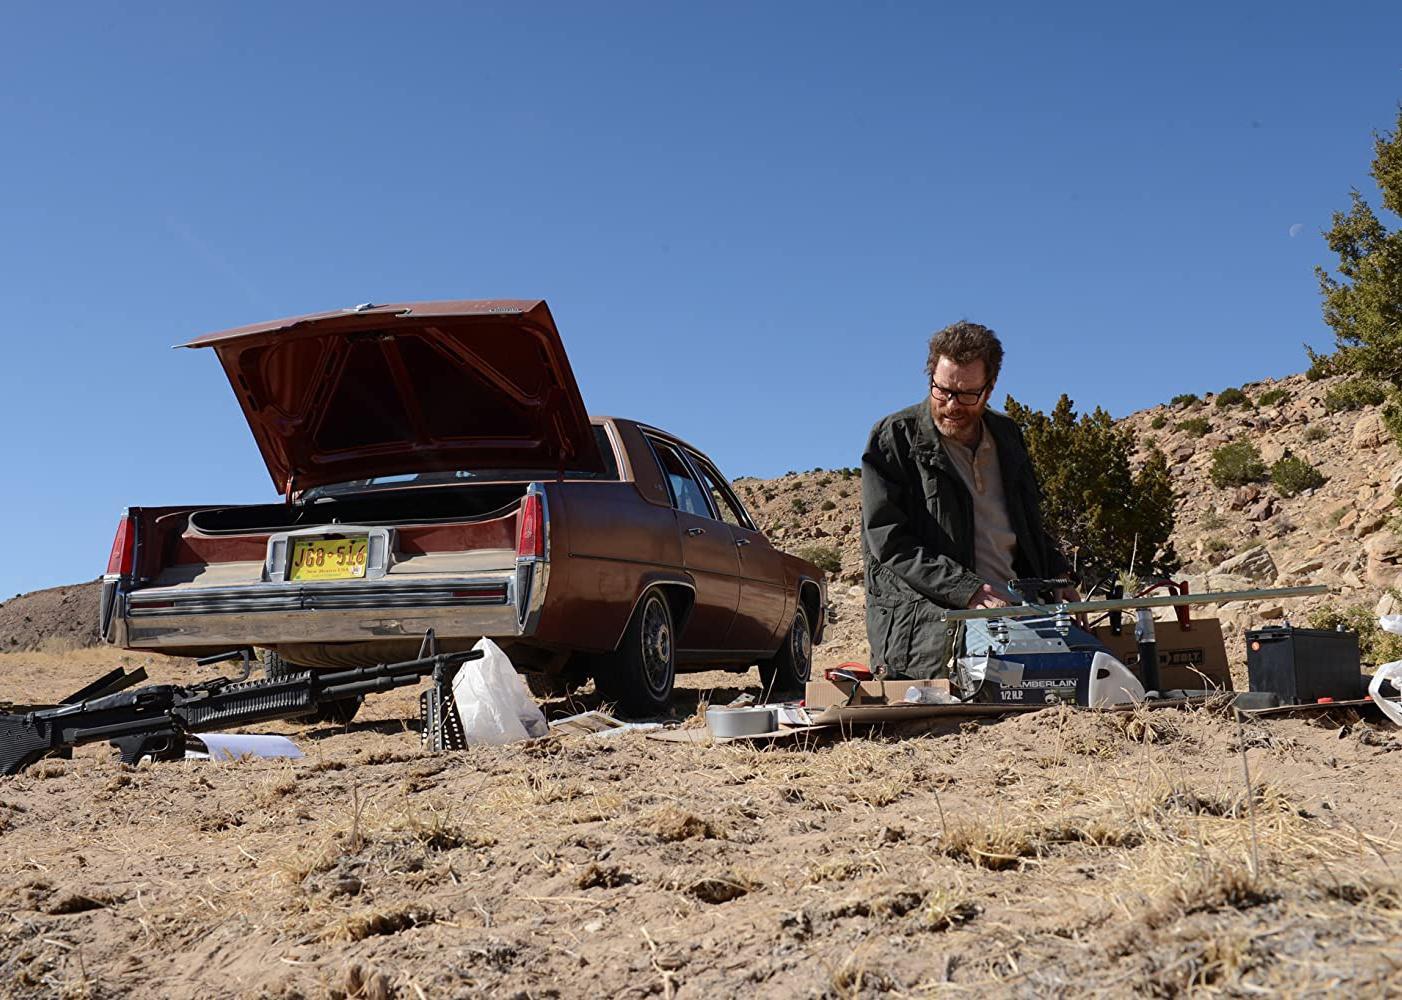 Bryan Cranston kneeling next to a car with a open truck surrounded by guns and tools.